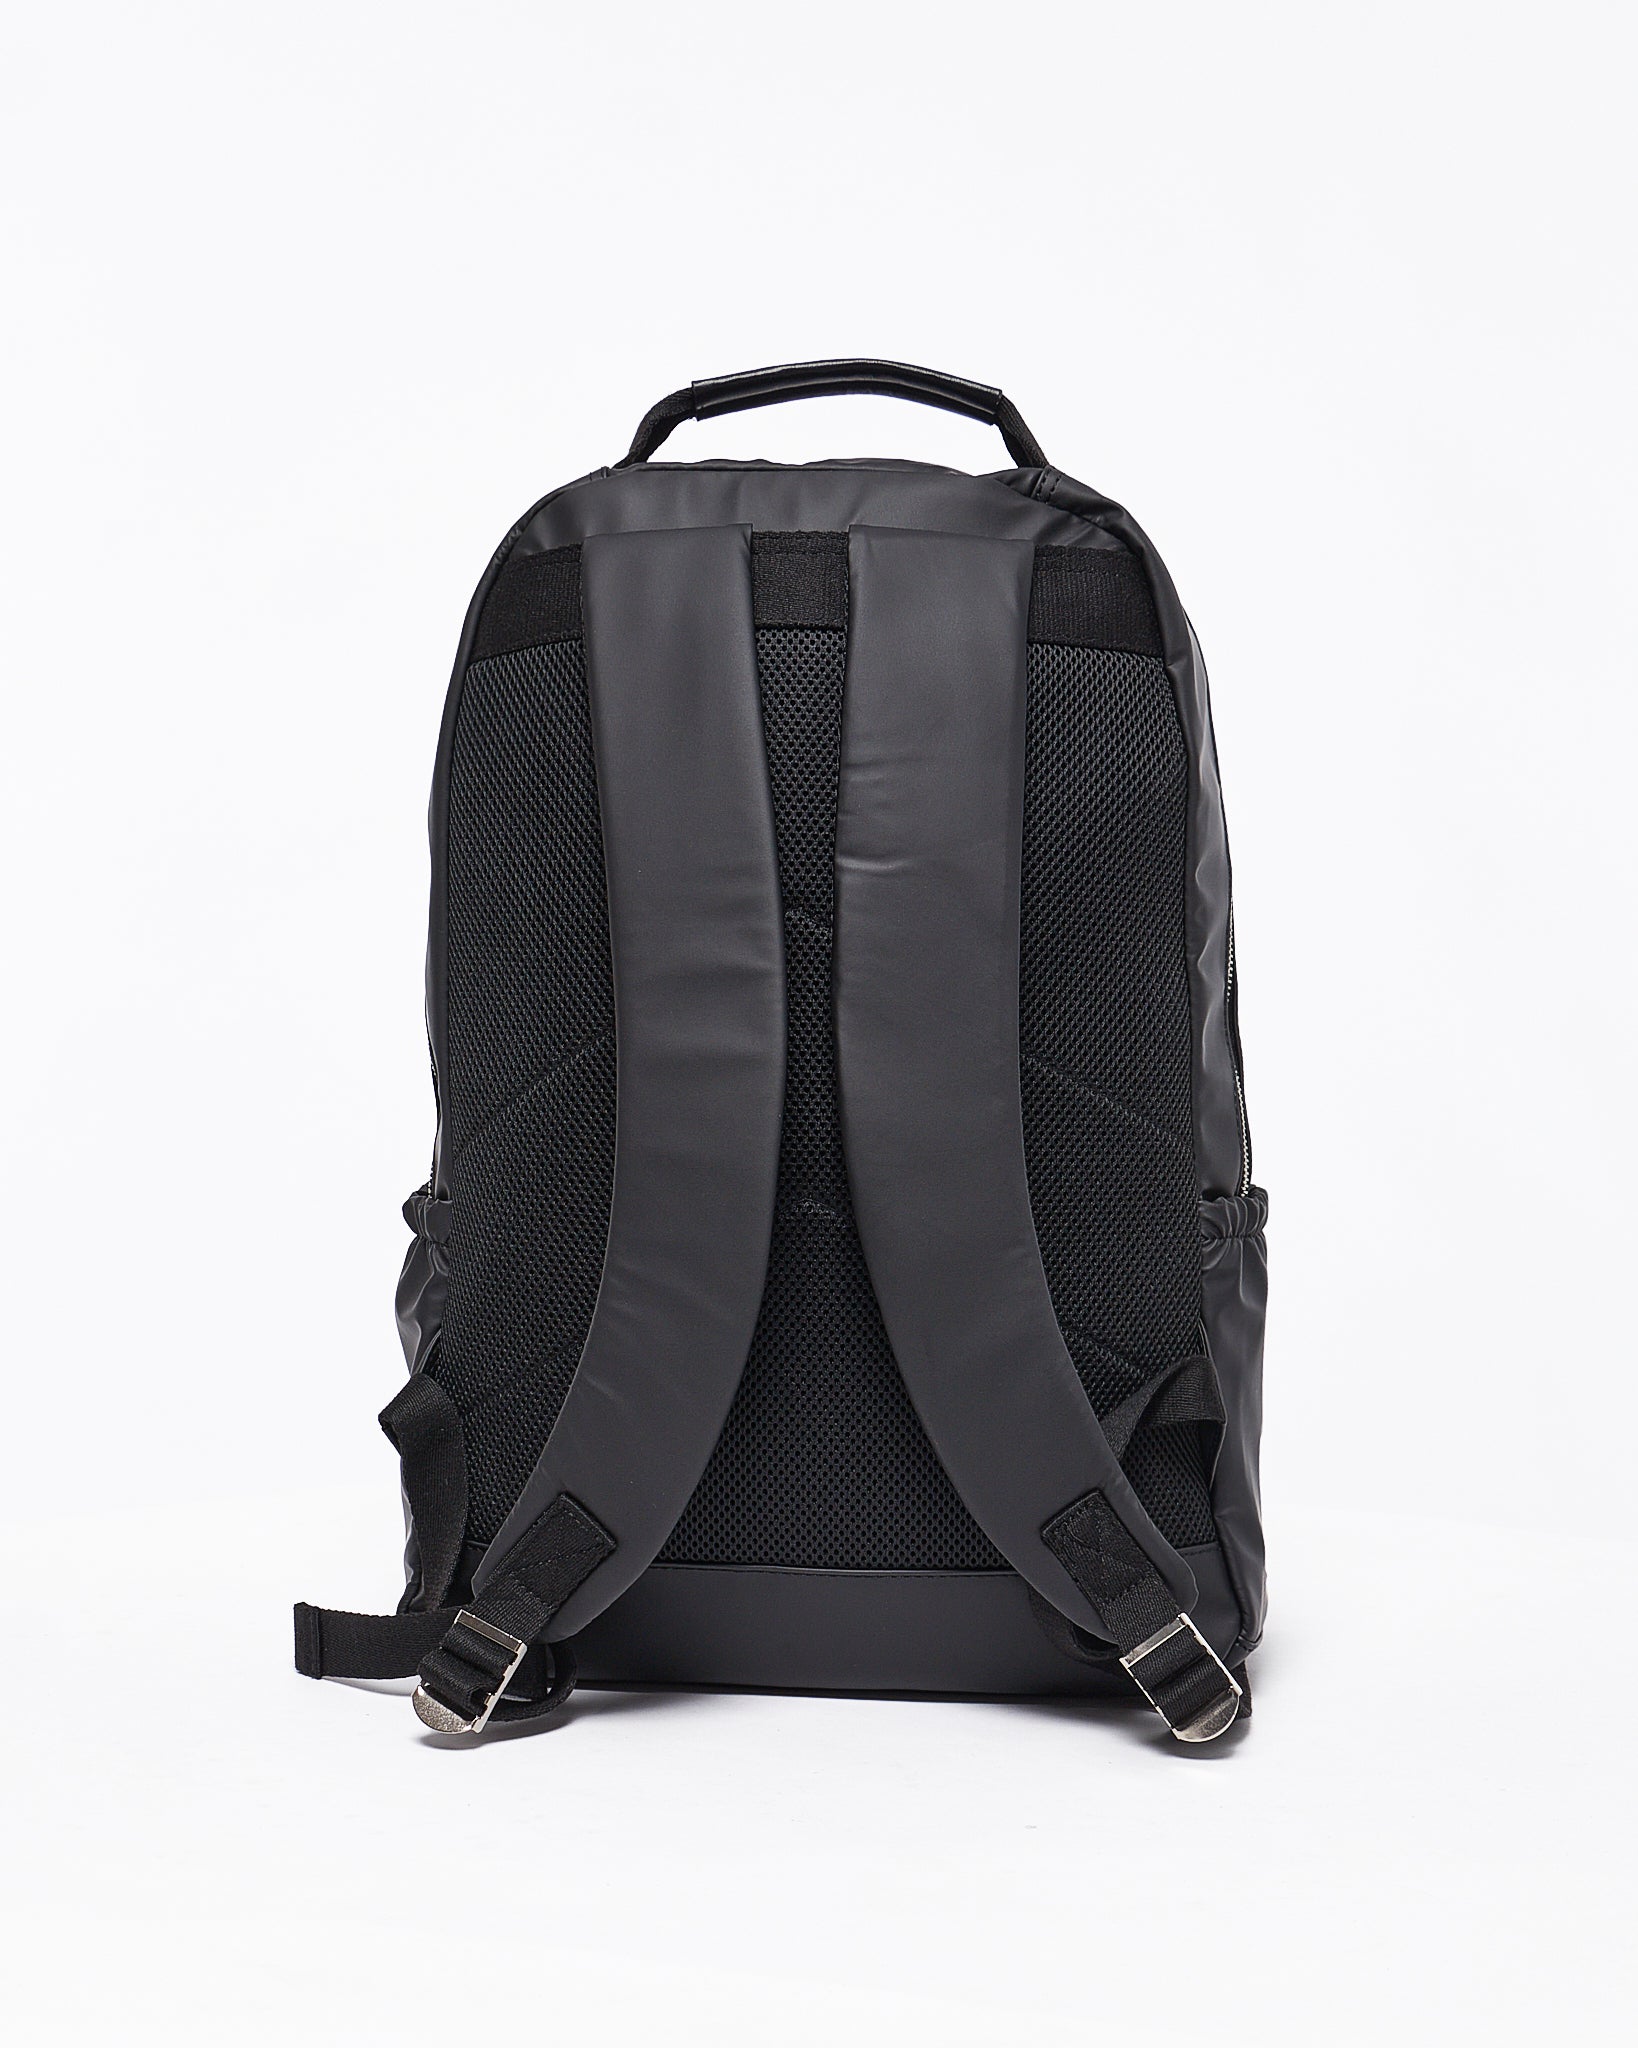 MOI OUTFIT-CK Men Backpack 39.90